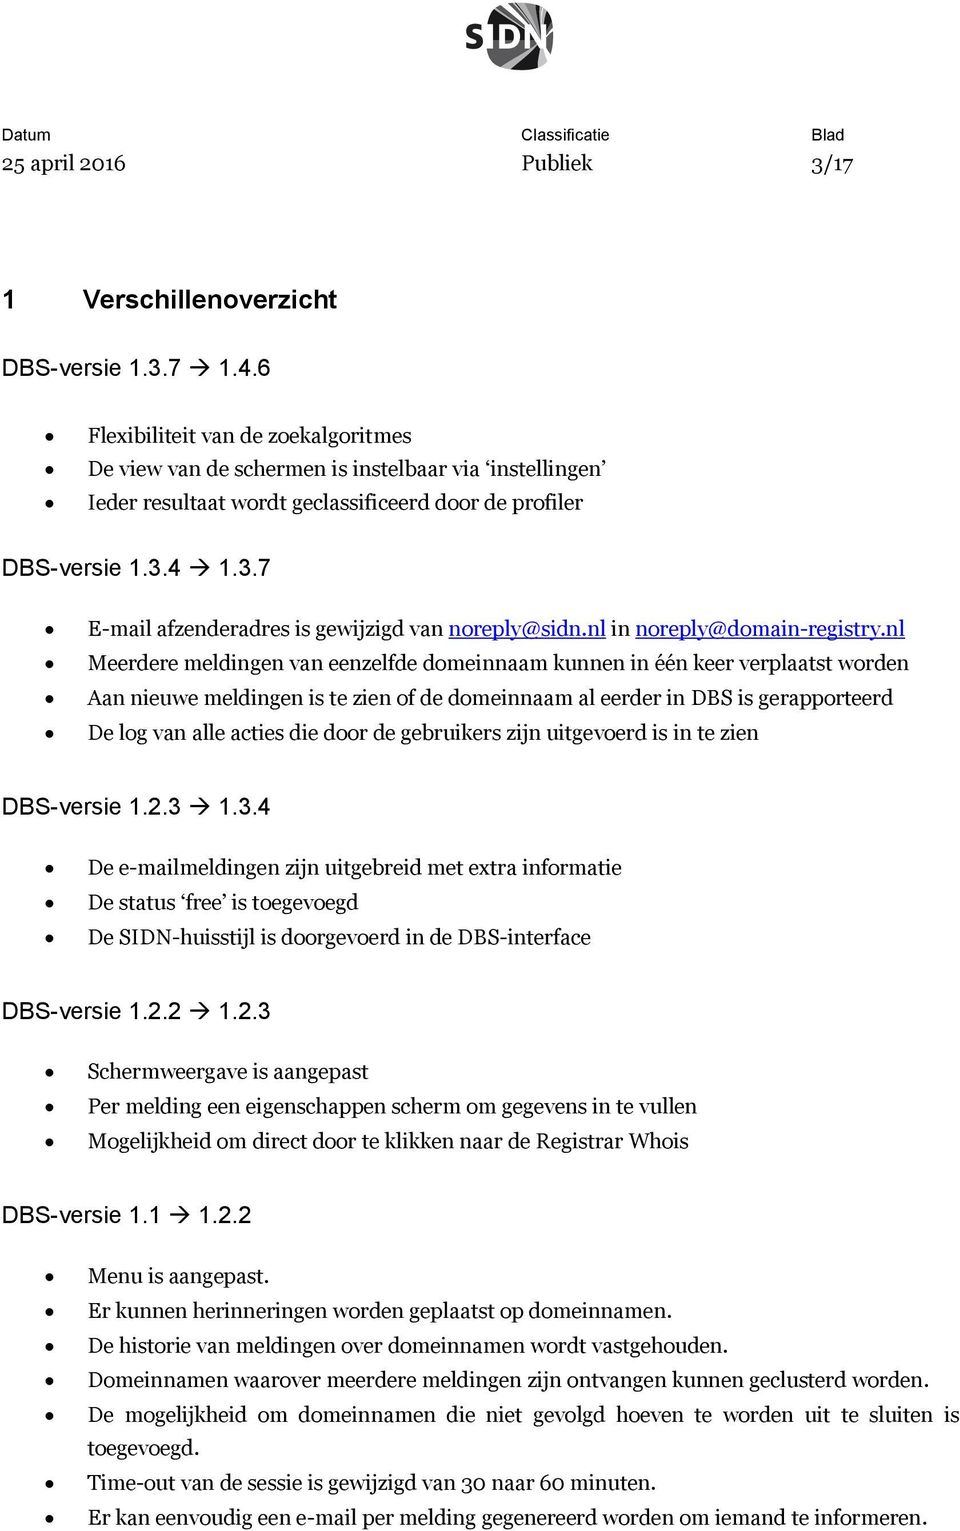 4 1.3.7 E-mail afzenderadres is gewijzigd van noreply@sidn.nl in noreply@domain-registry.